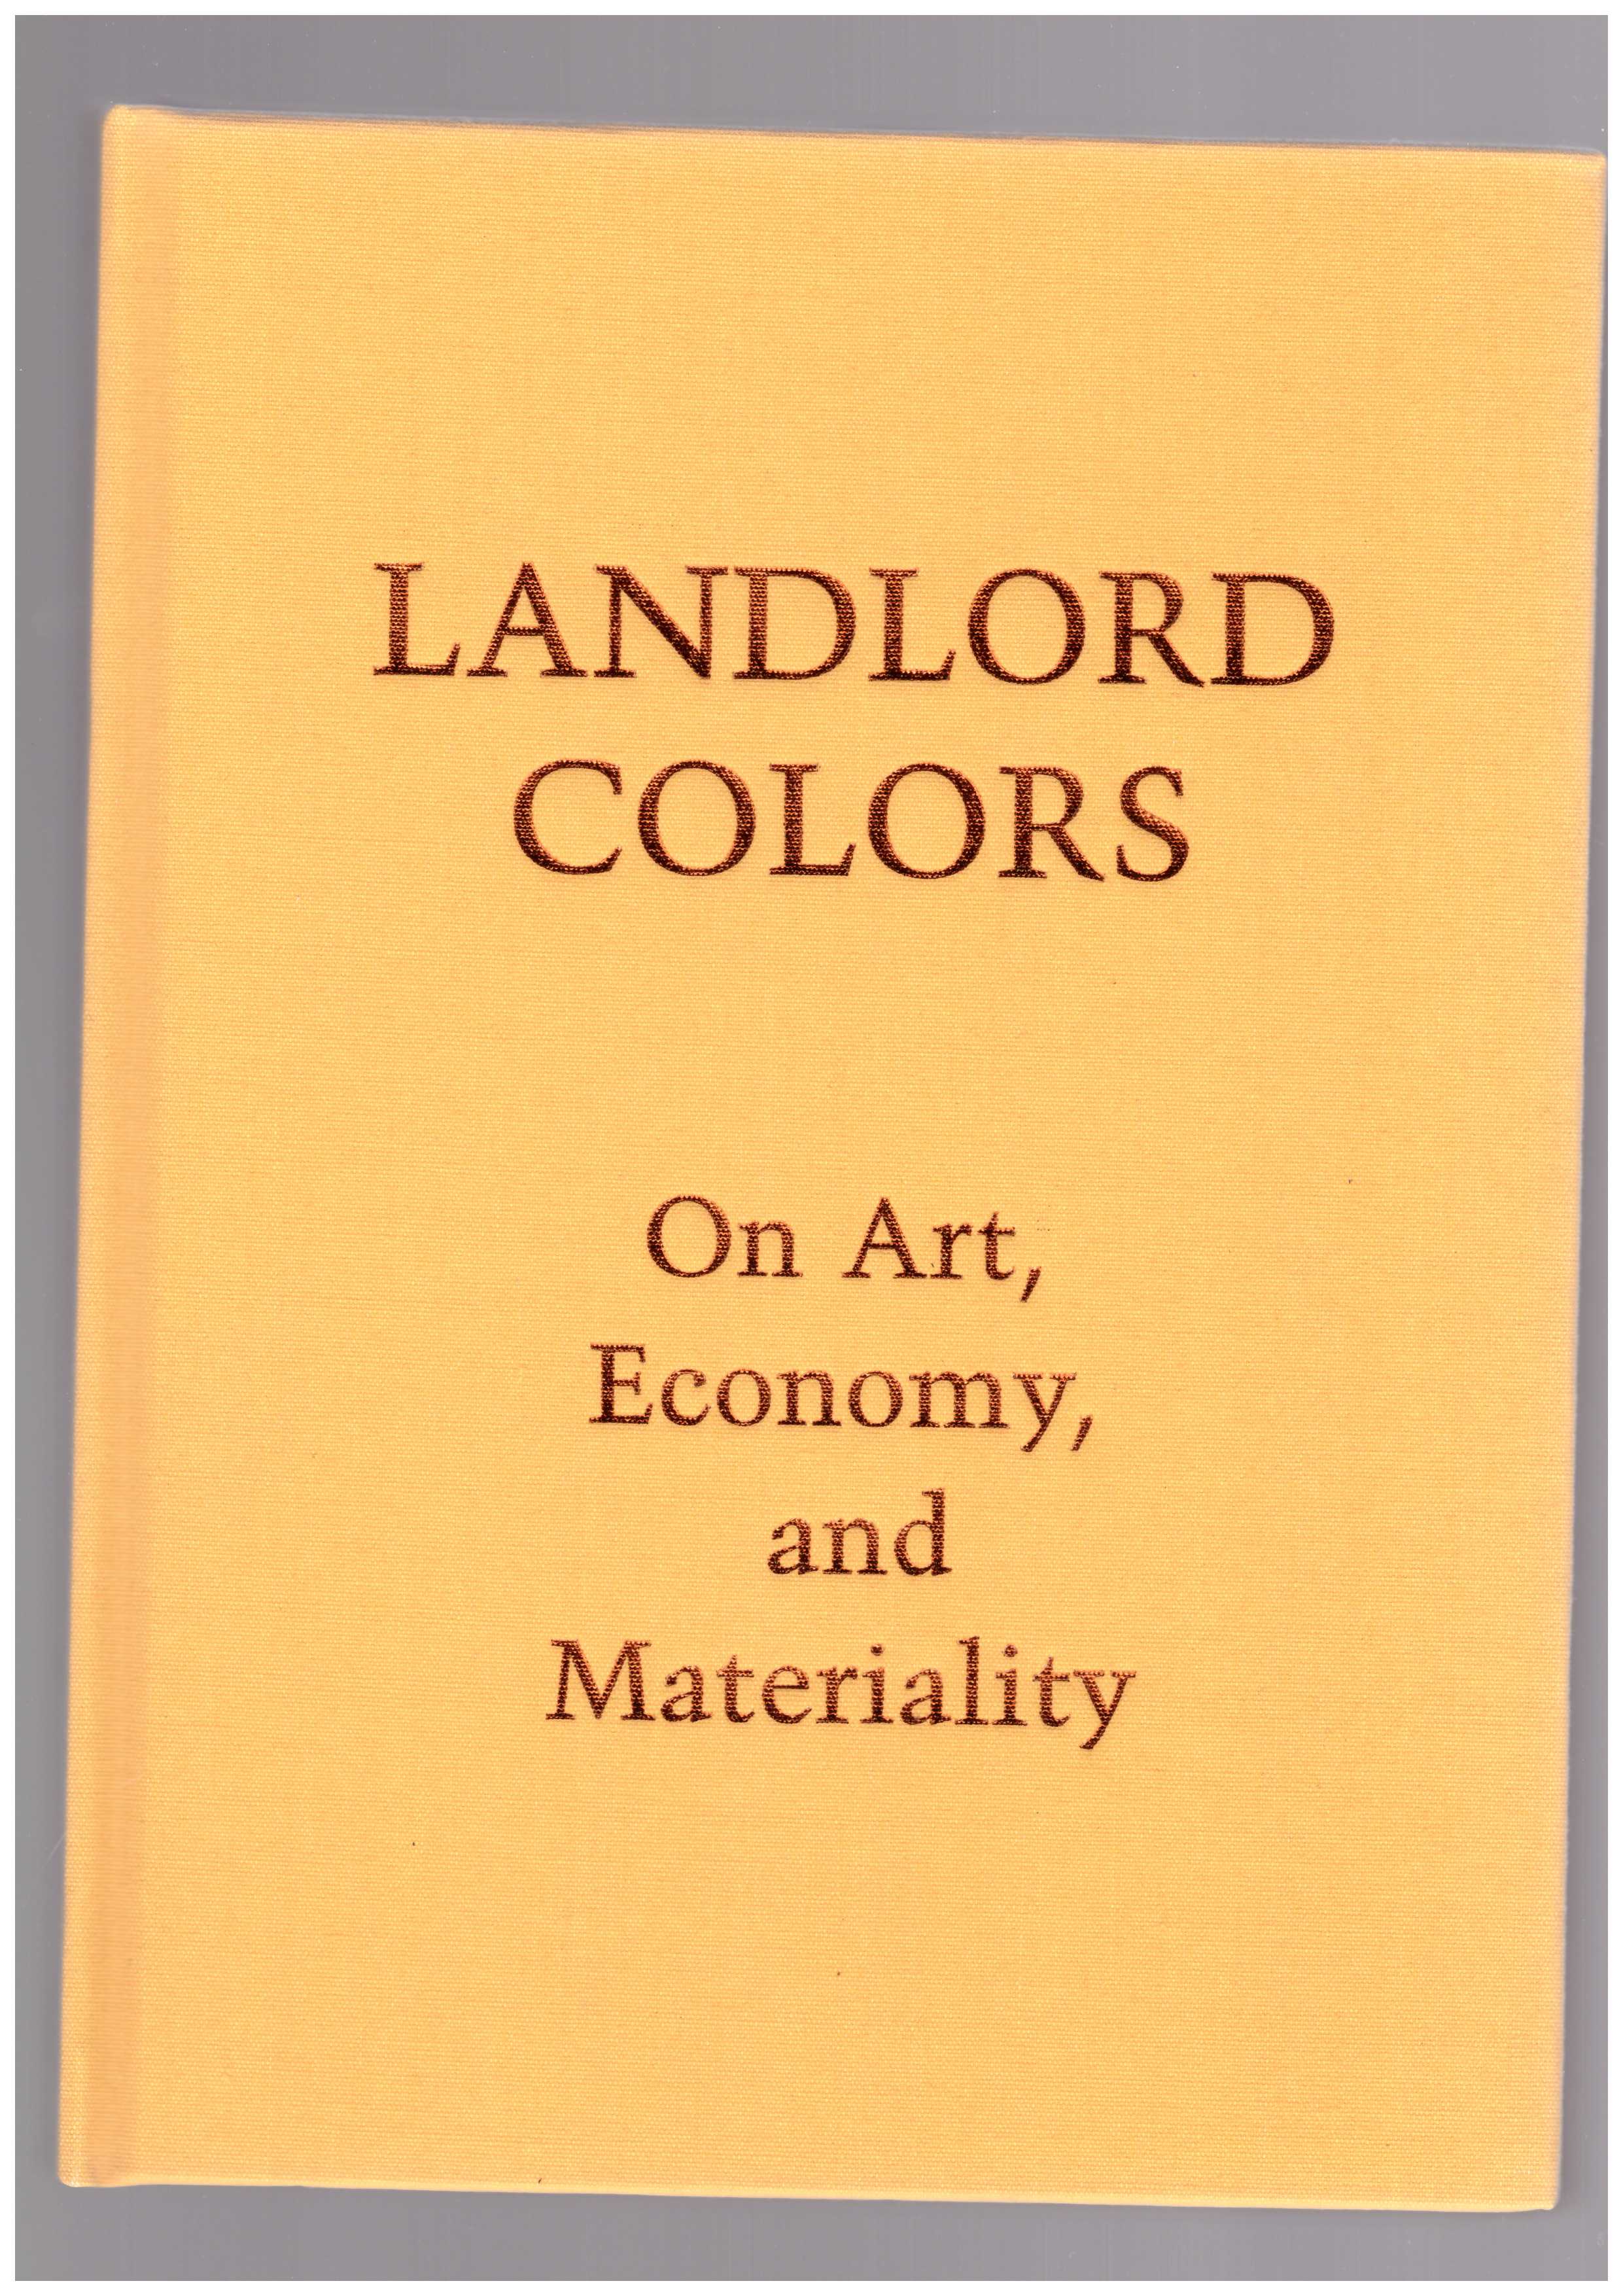 MOTT, Laura (ed.) - Landlord Colors: On Art, Economy, and Materiality